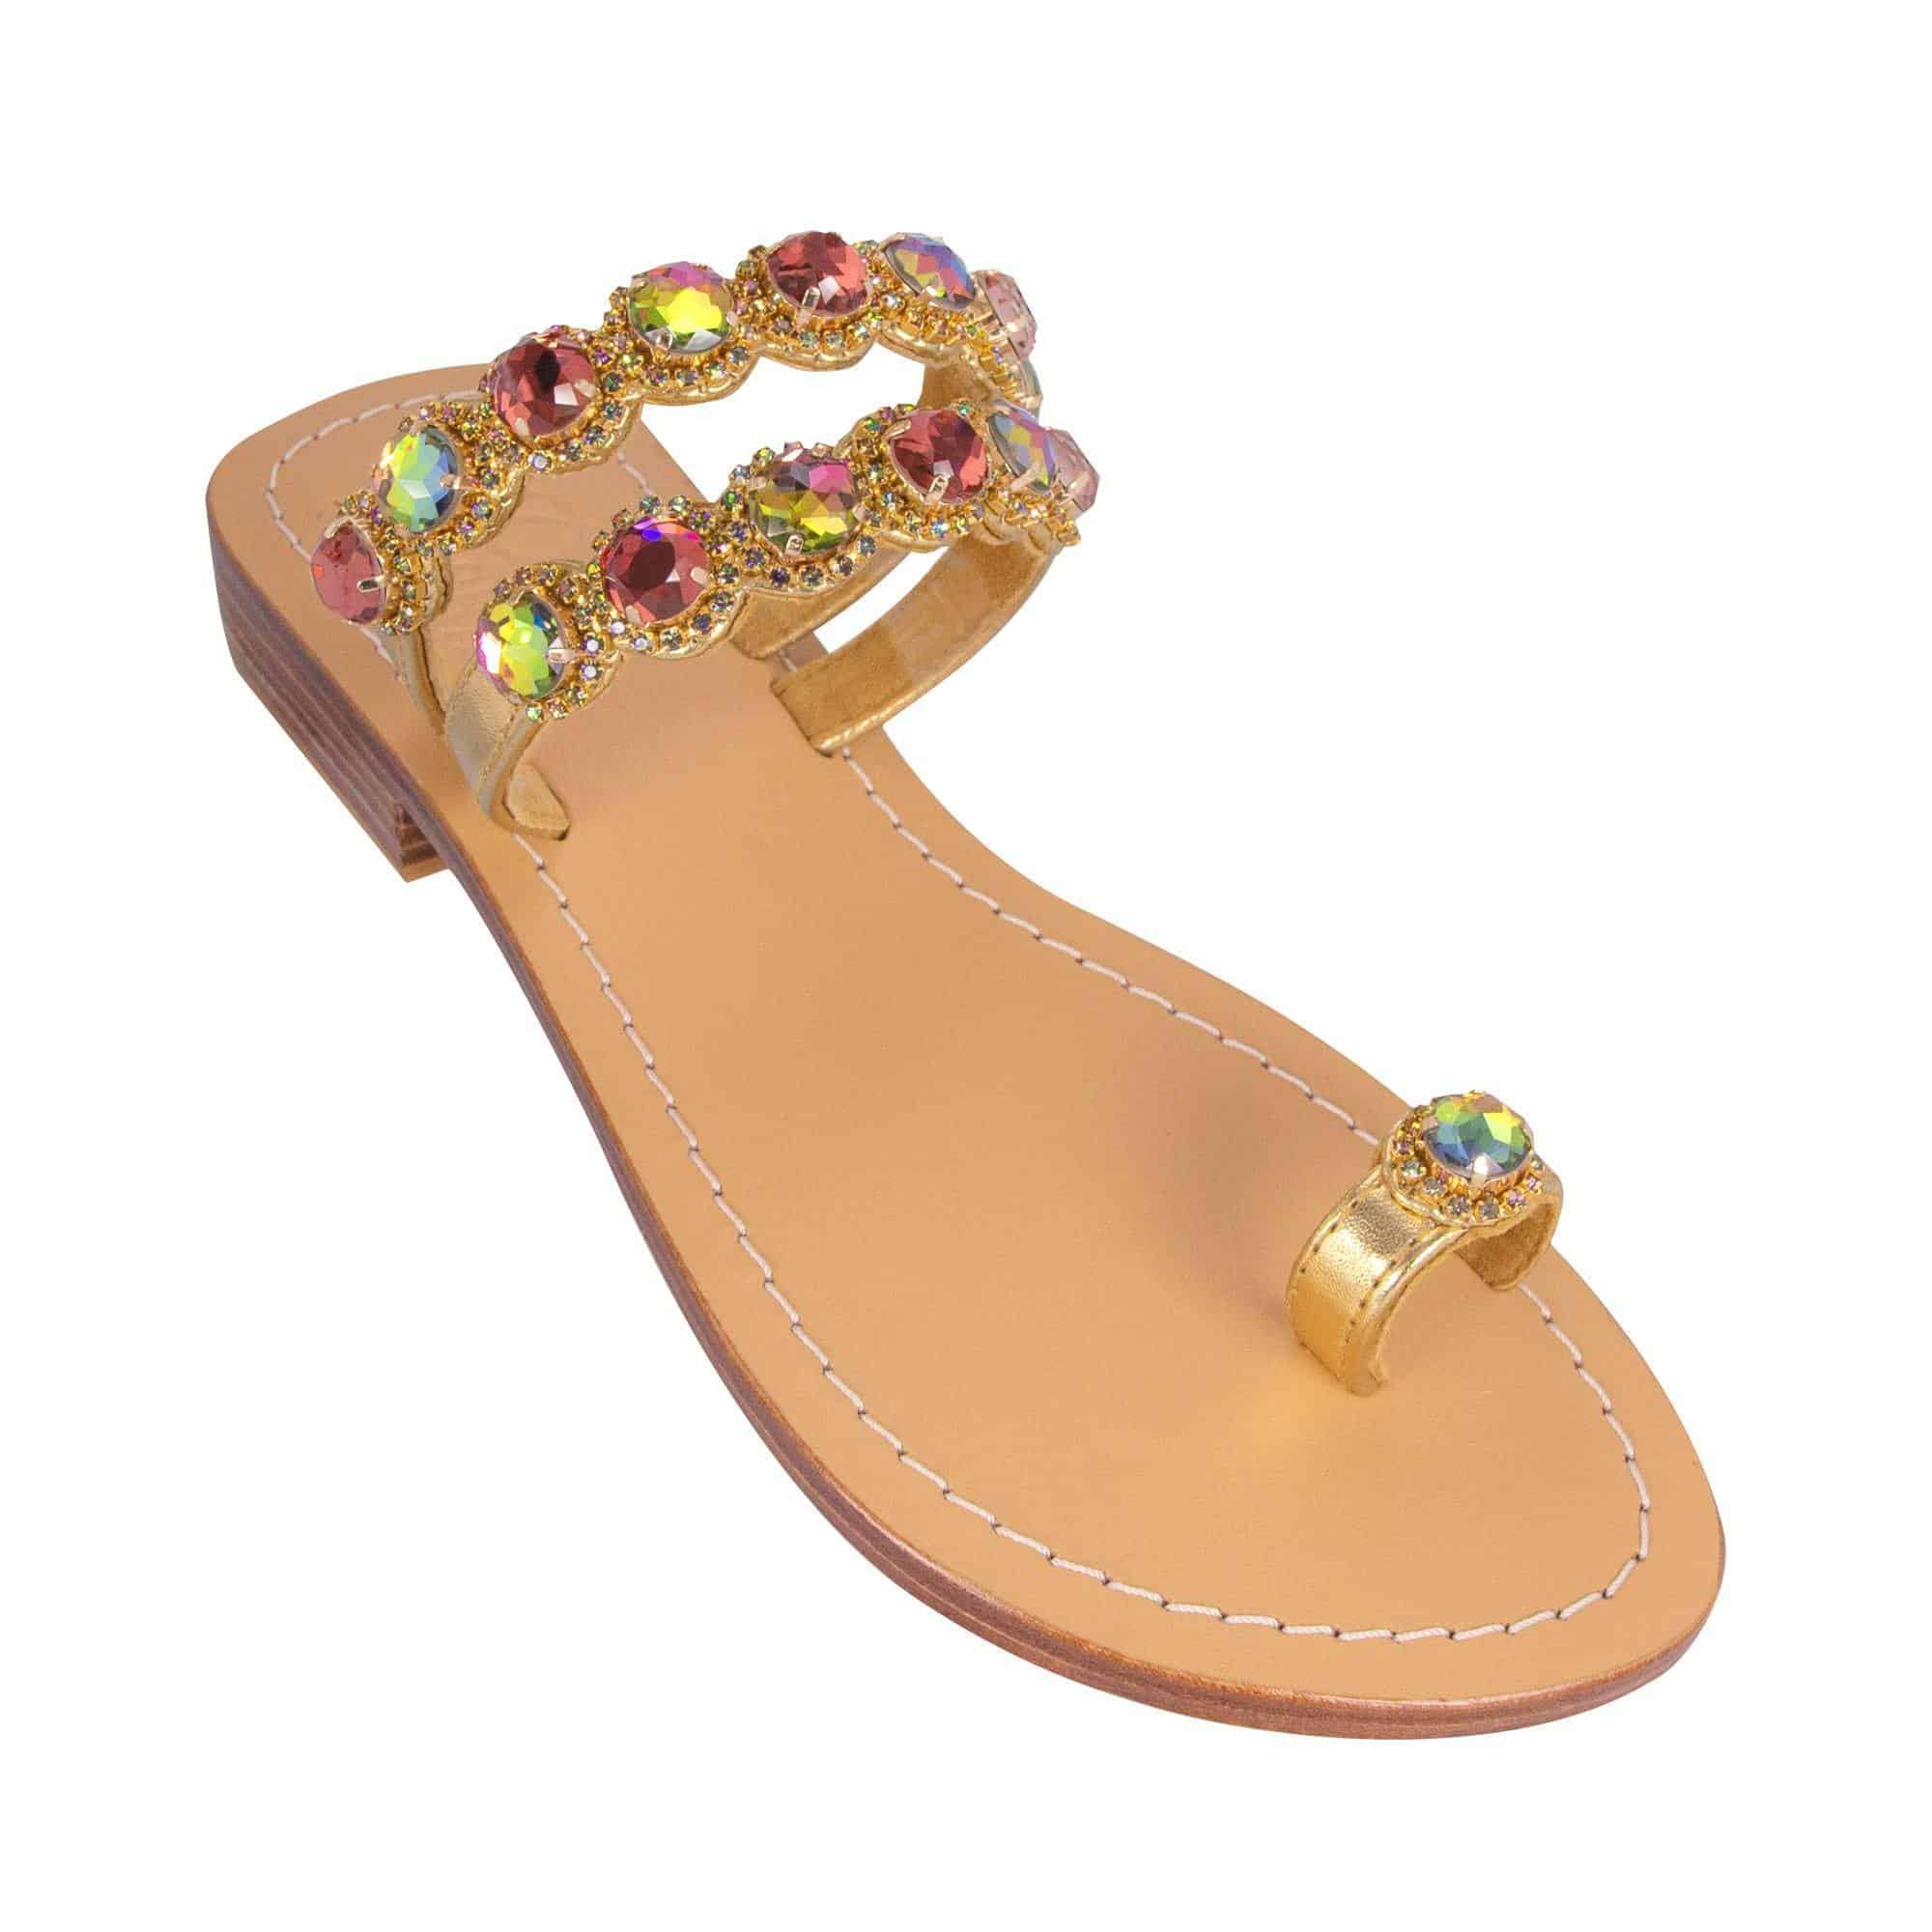 GIBBES - Pasha Sandals - Jewelry for your feet - 